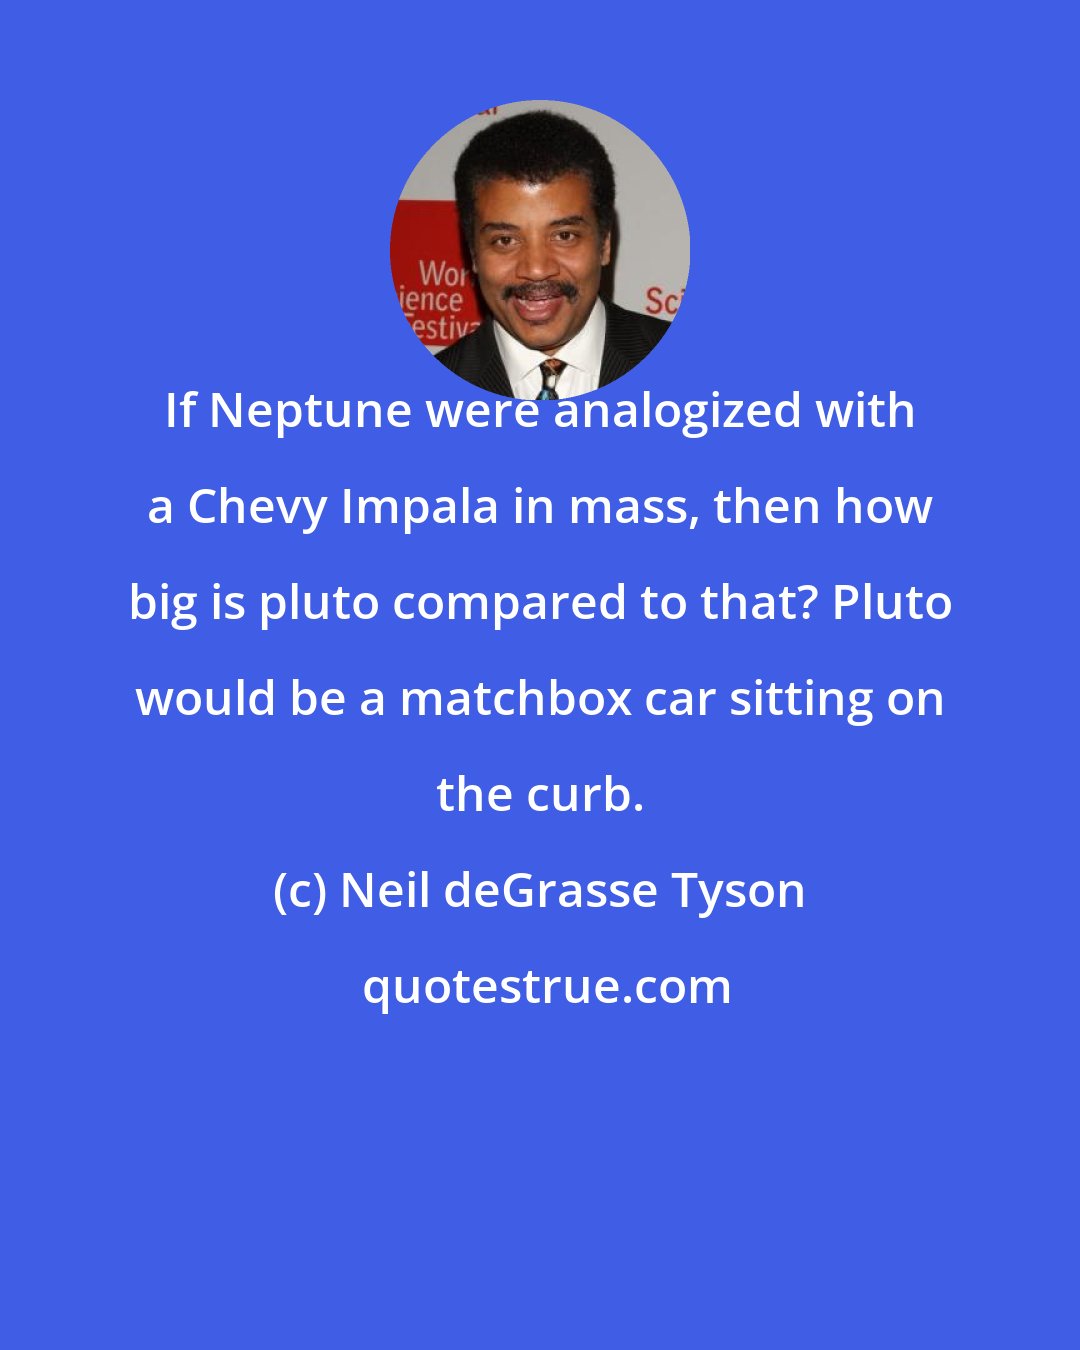 Neil deGrasse Tyson: If Neptune were analogized with a Chevy Impala in mass, then how big is pluto compared to that? Pluto would be a matchbox car sitting on the curb.